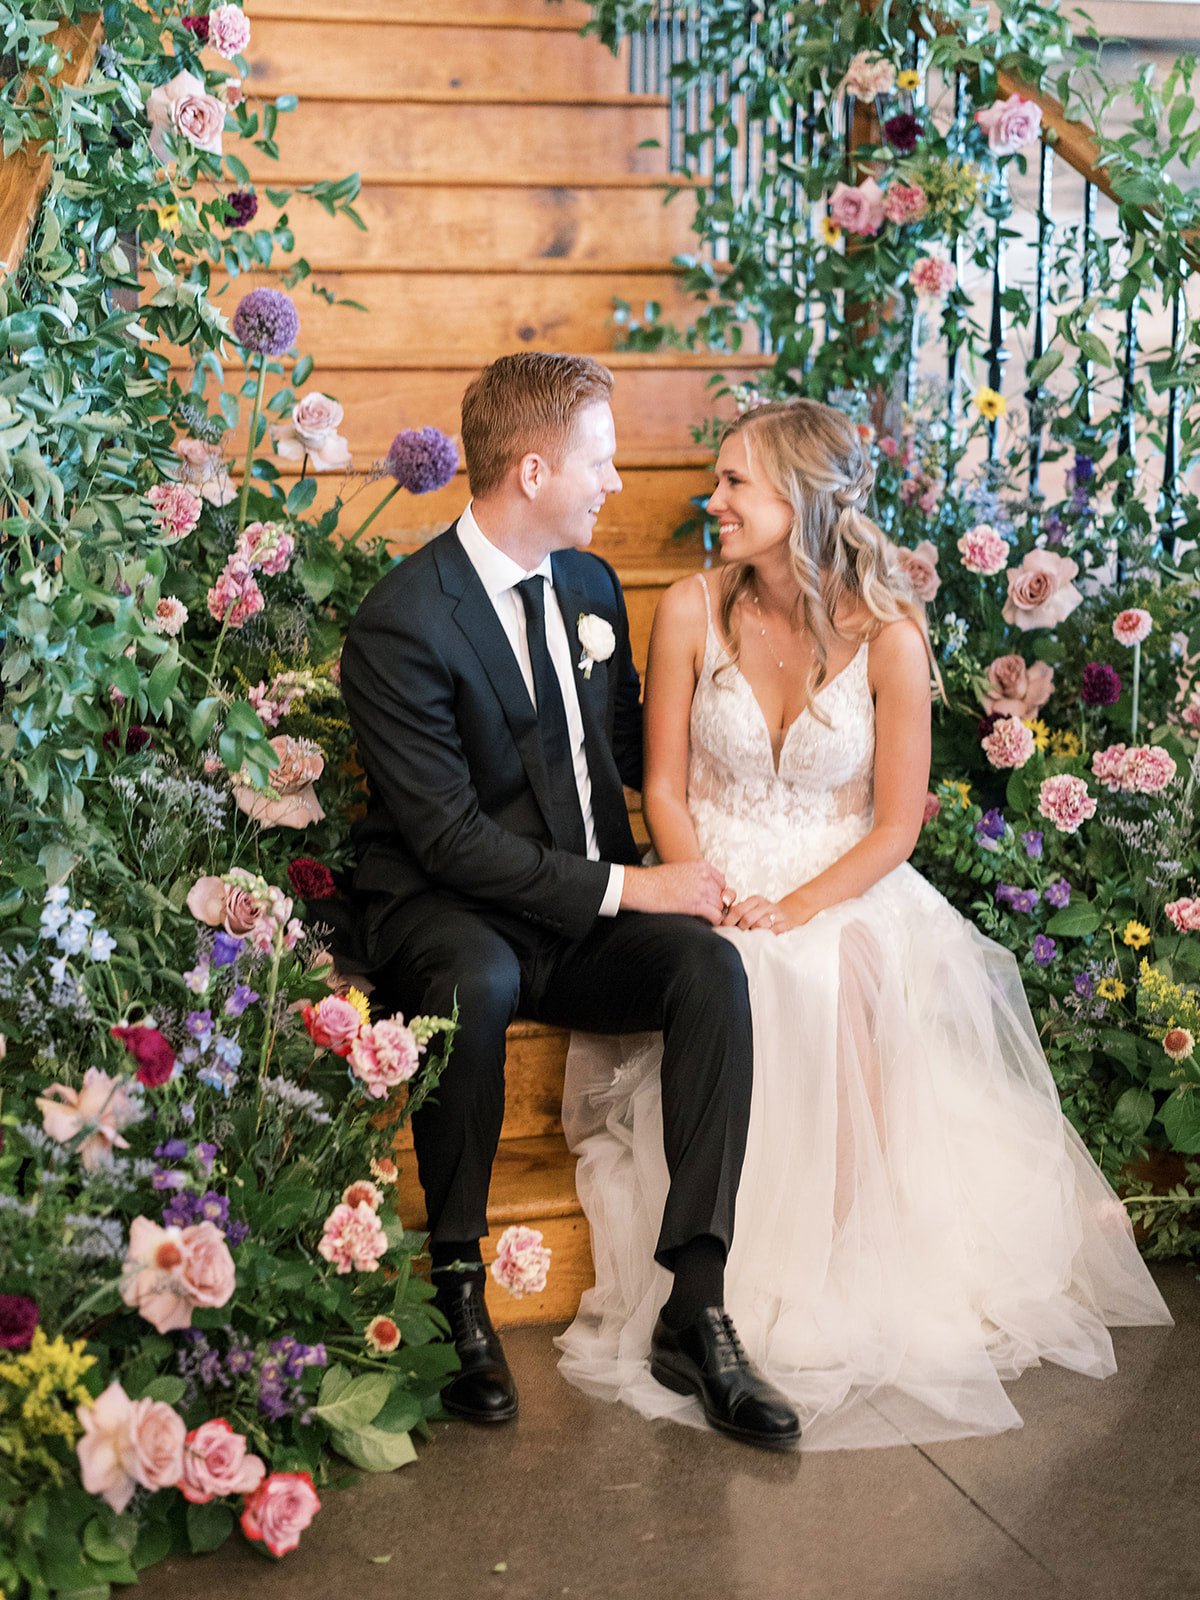 Bride and groom sitting on stairs with lush organic wildflower on stairs by Colorado wedding planner Shannon rose events